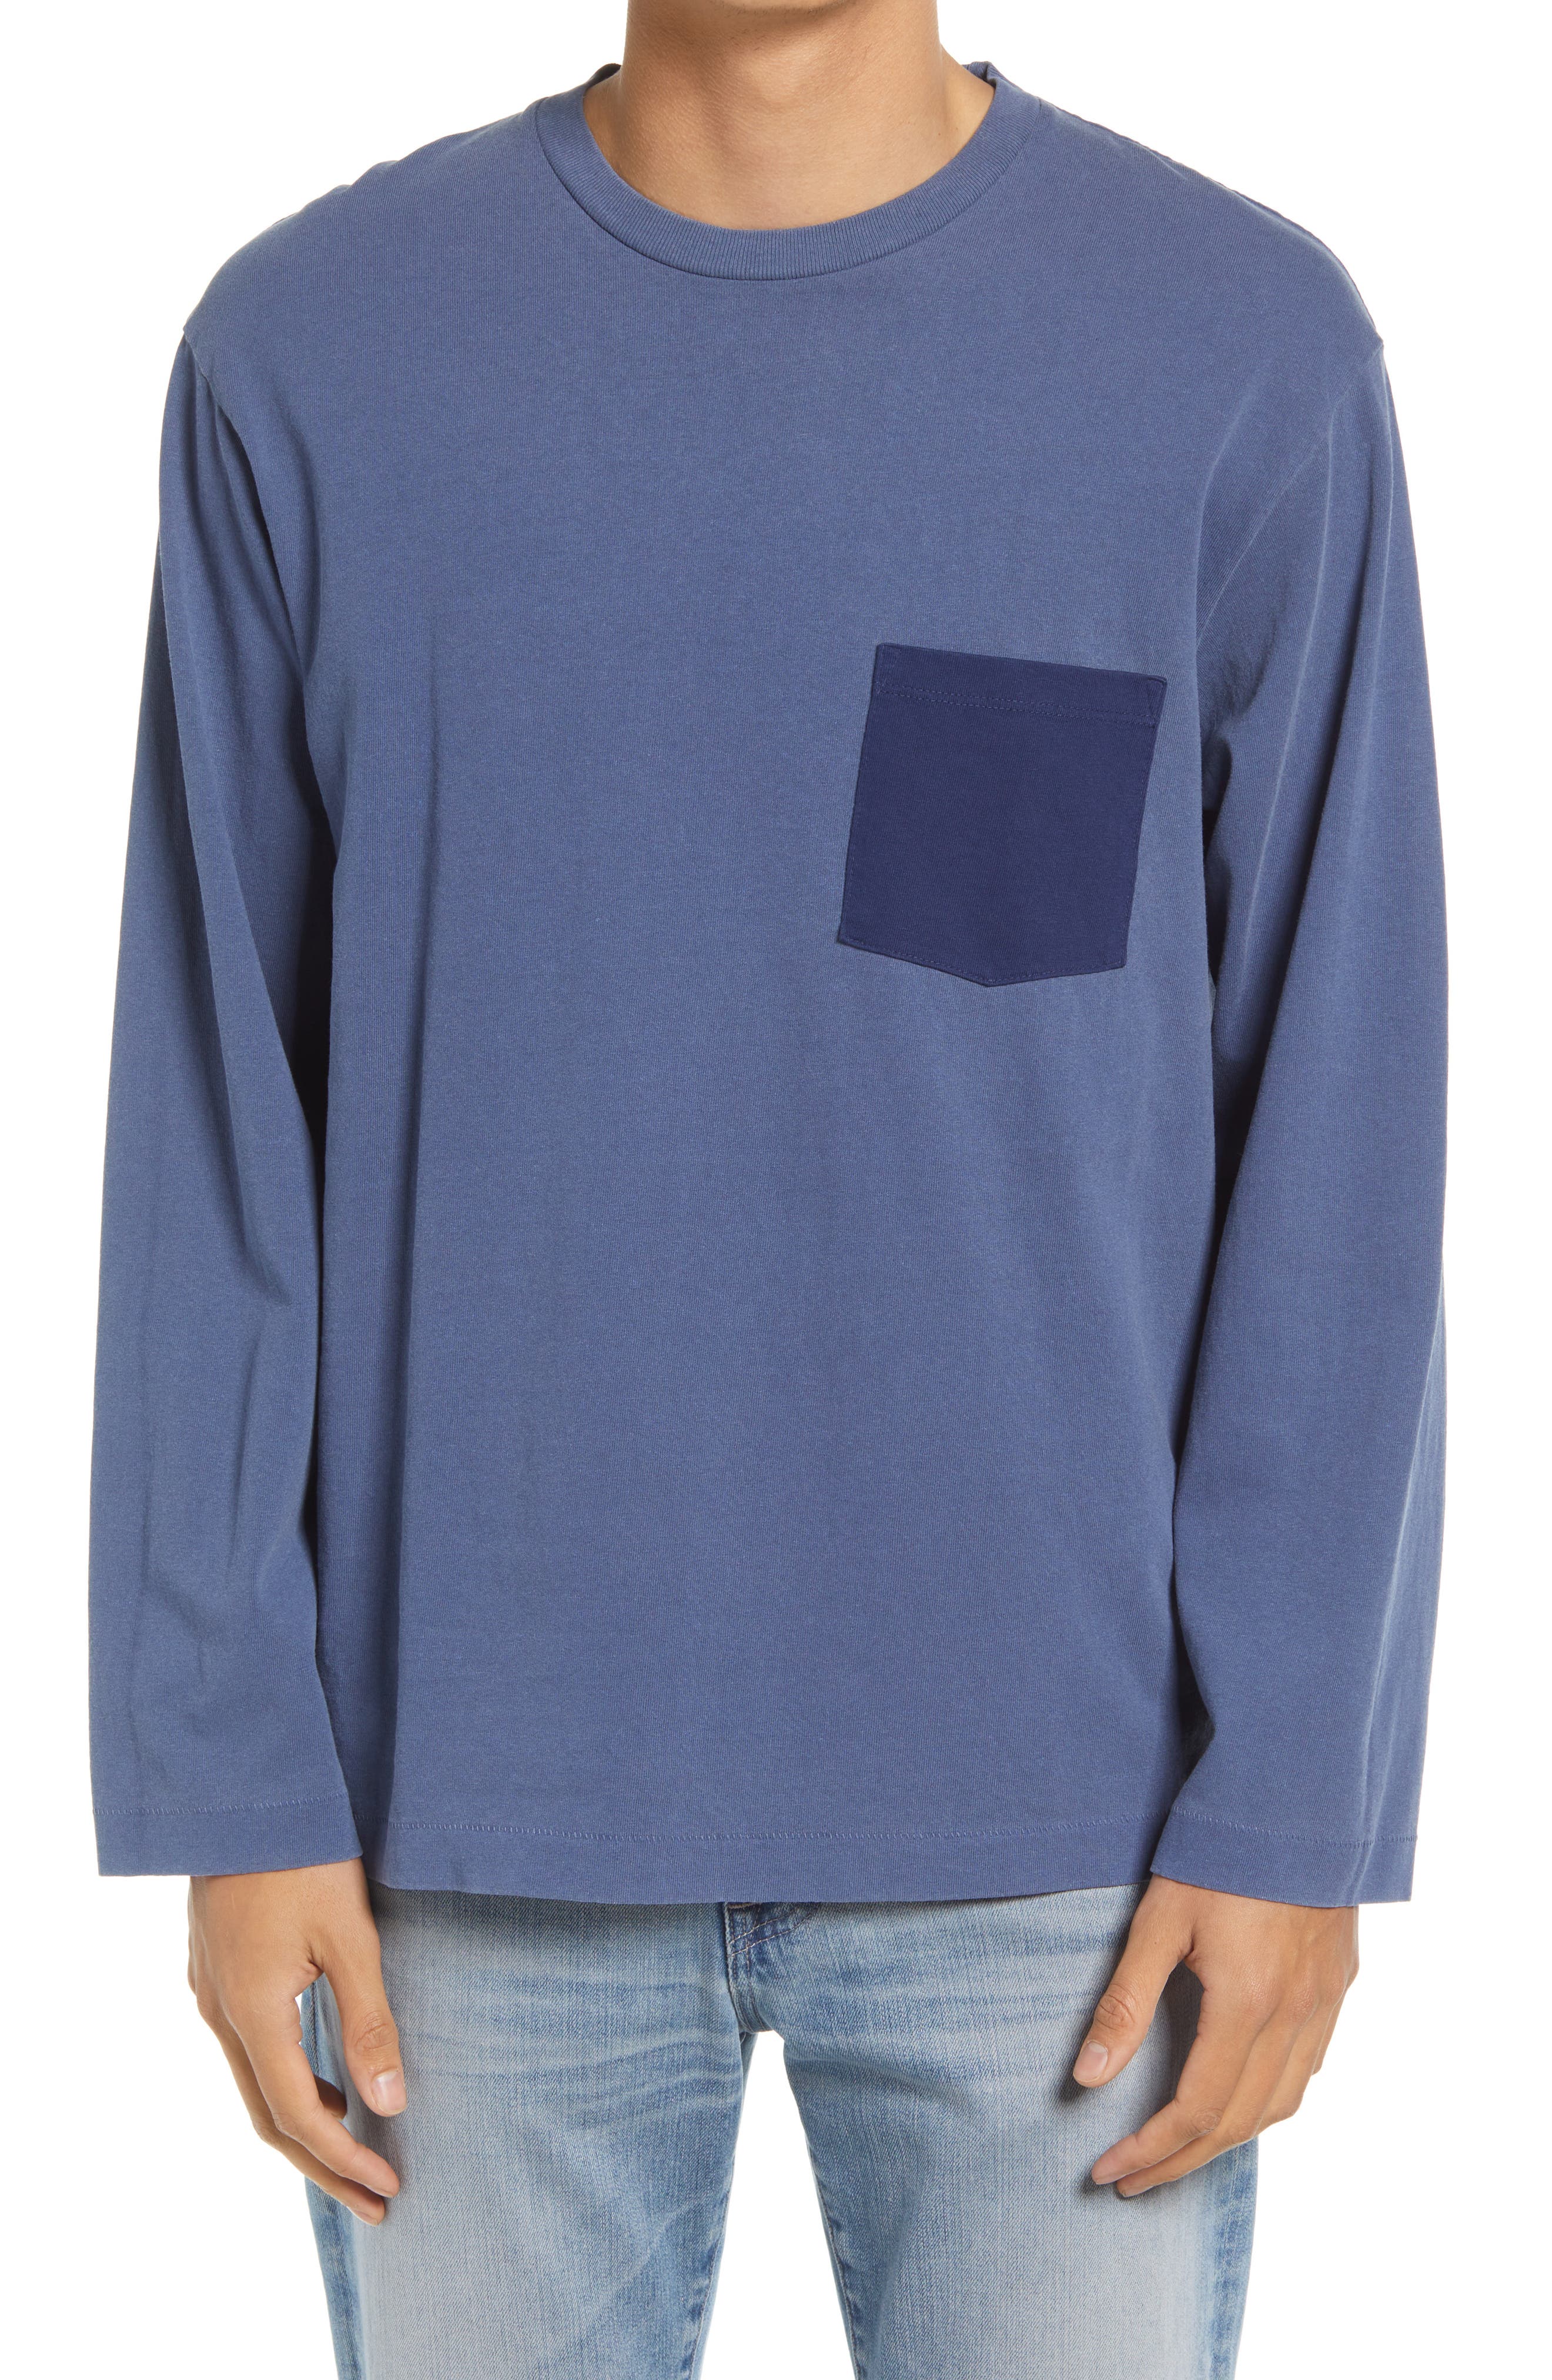 John Elliott 1992 Long Sleeve Cotton T-Shirt in Pacific at Nordstrom, Size Small